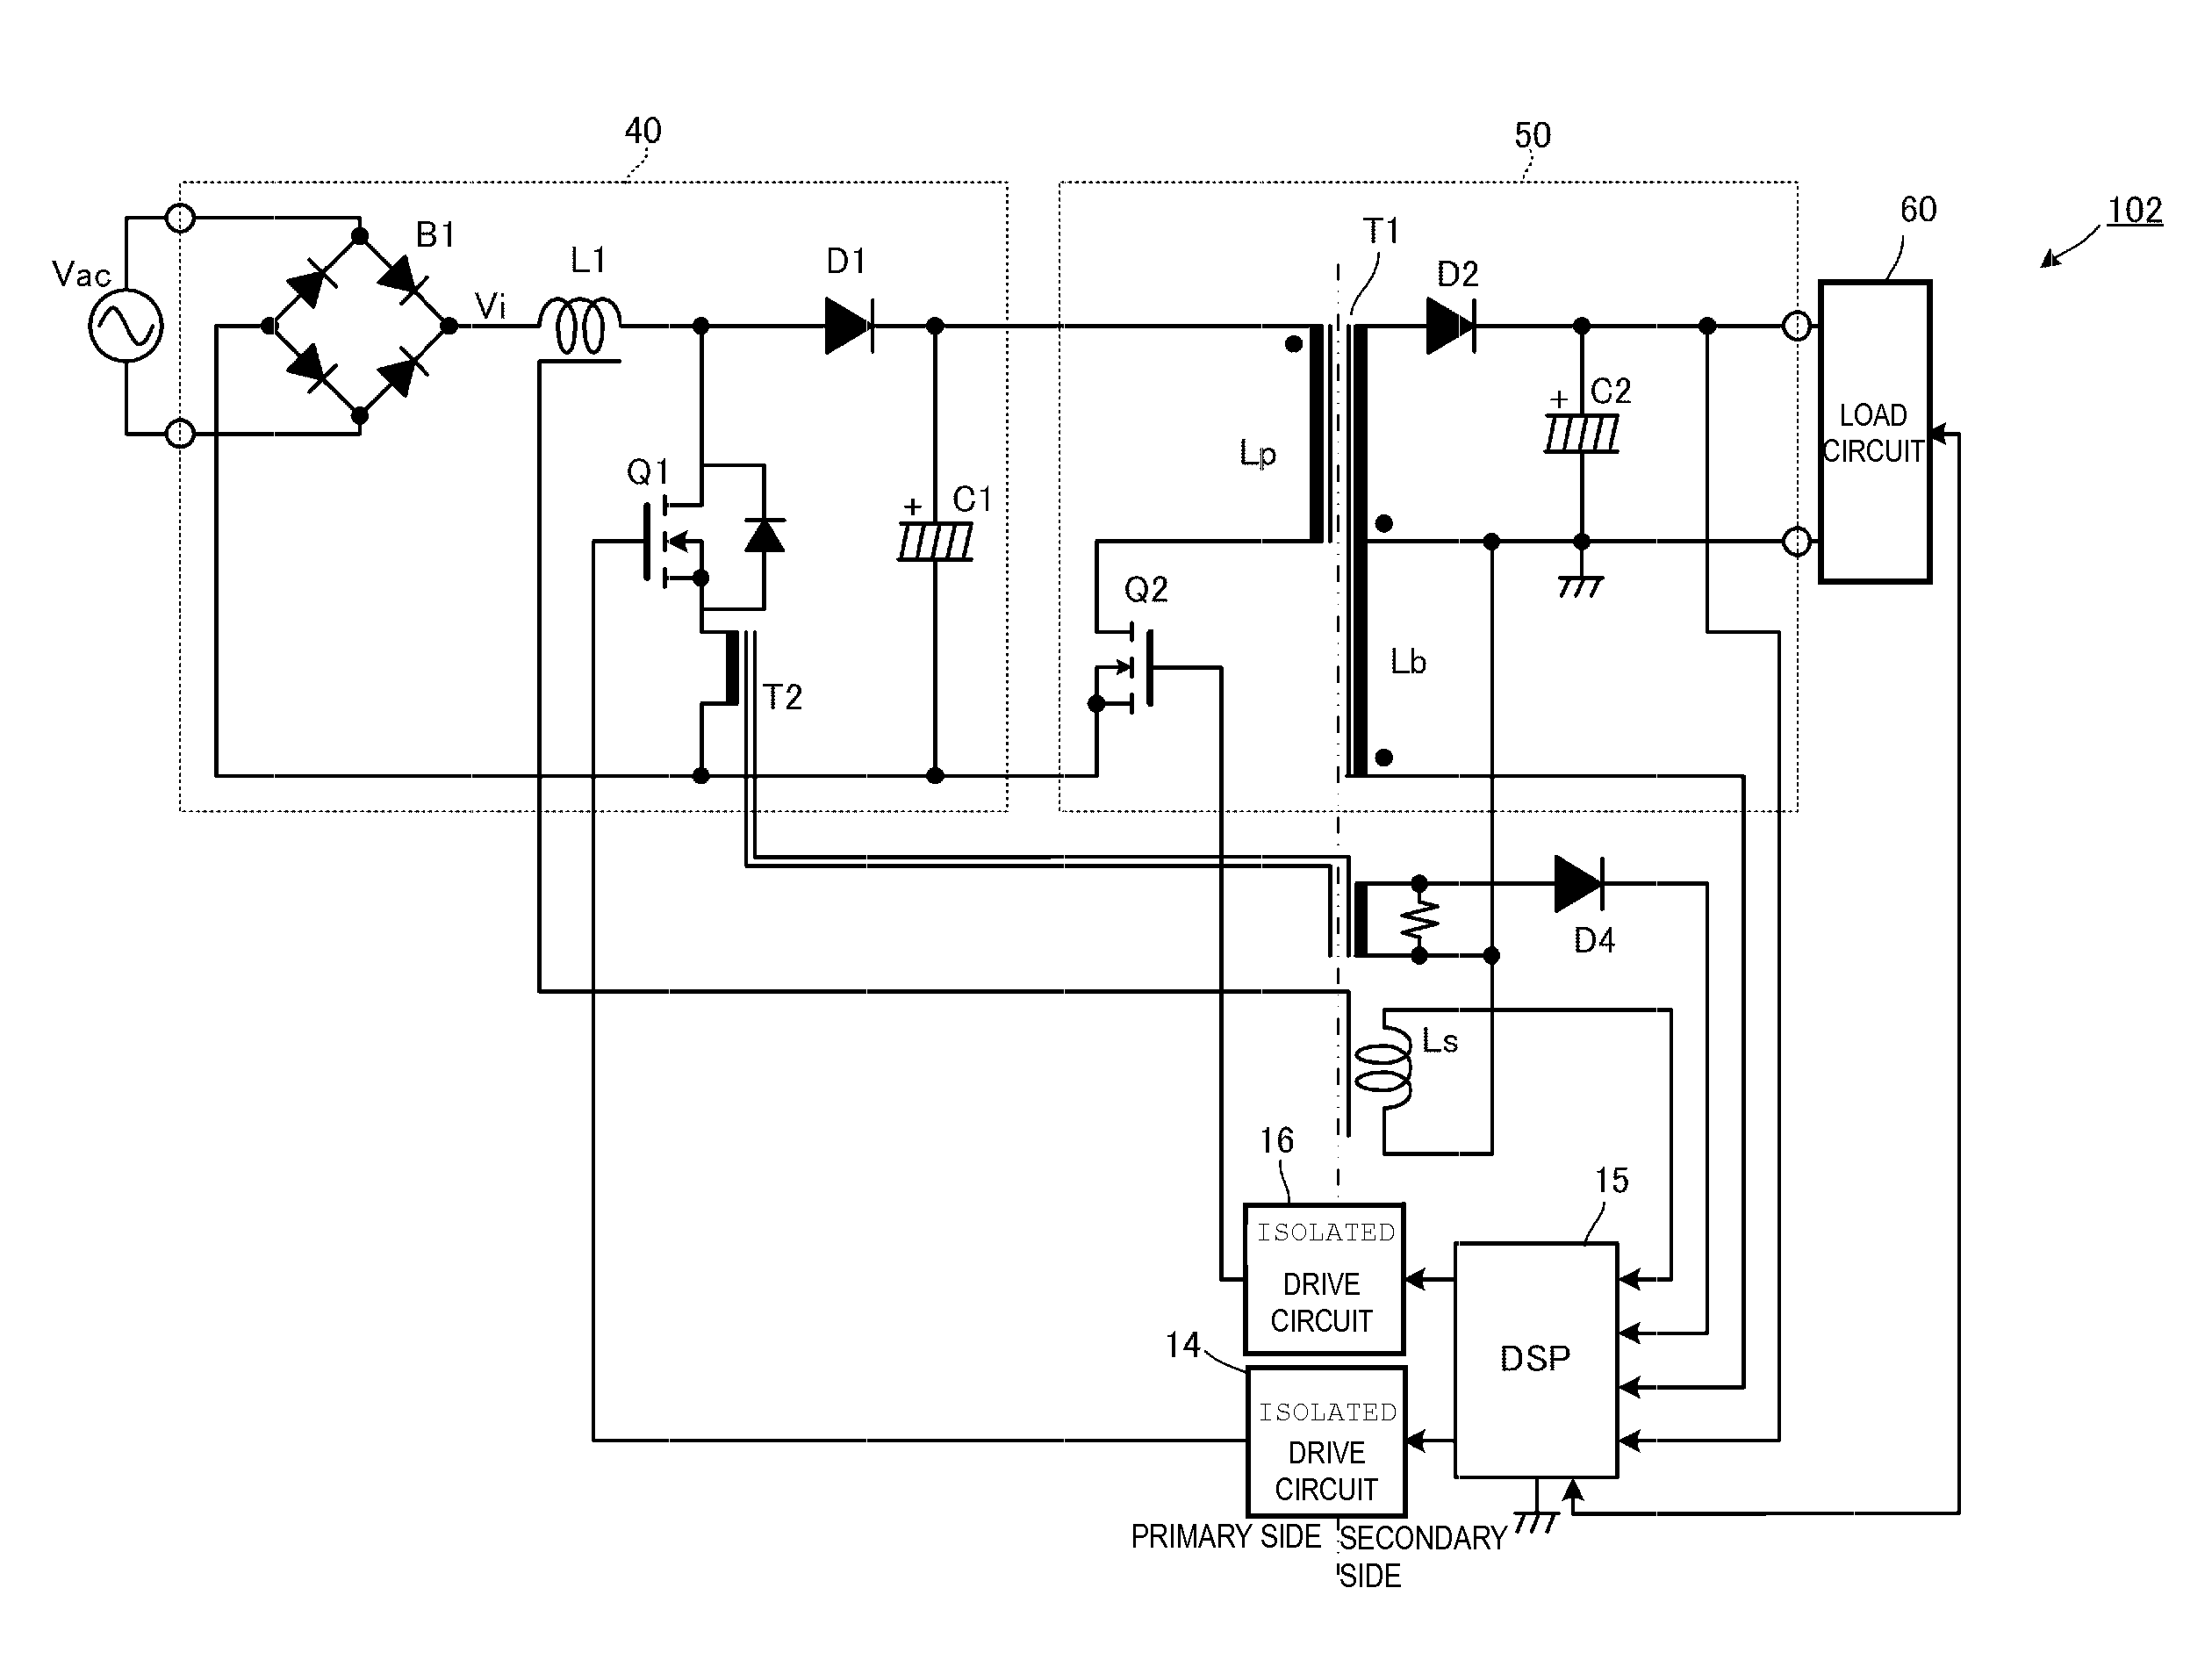 DC-DC switching power supply with power factor correction